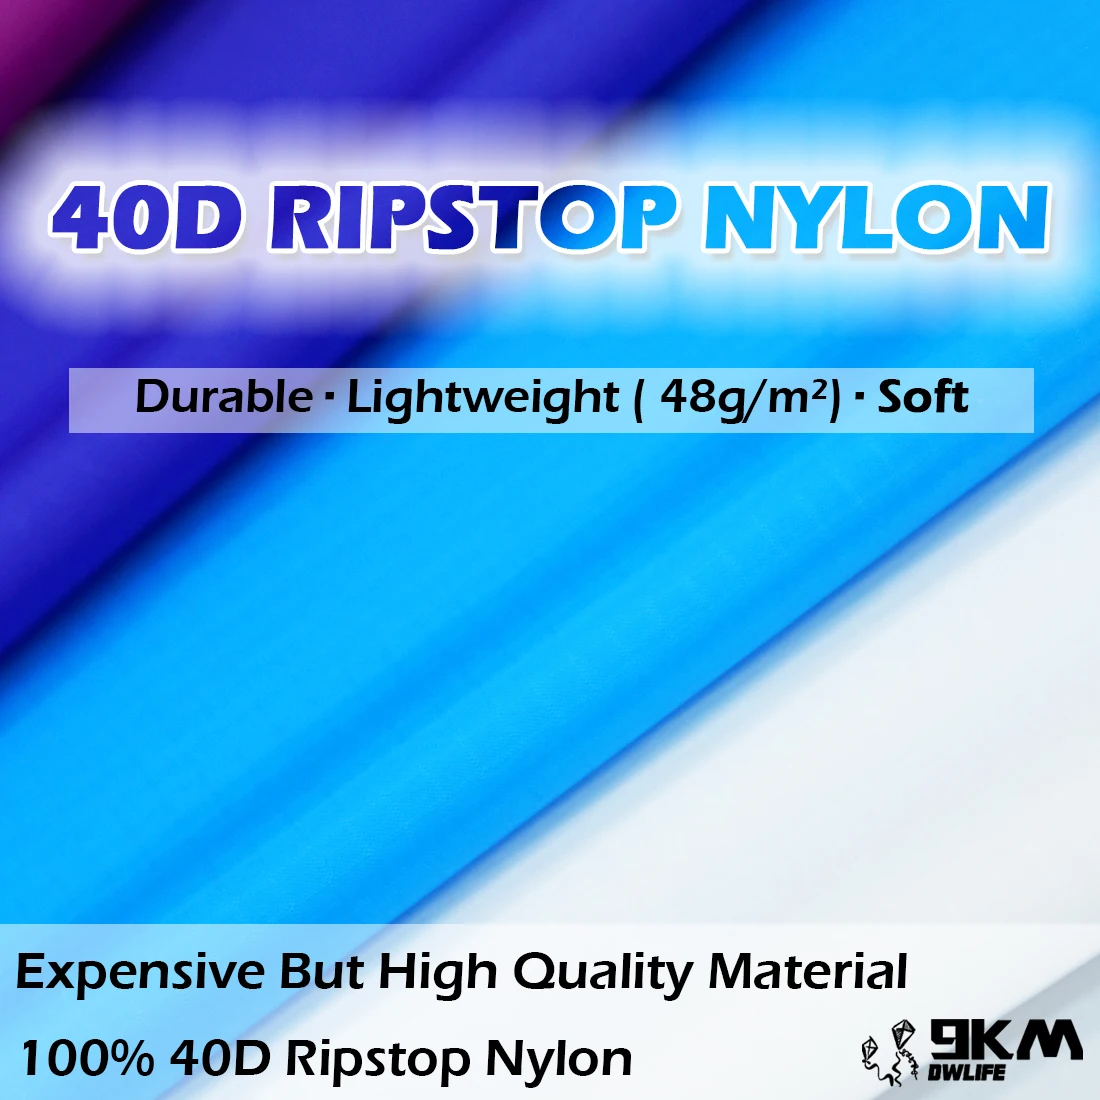 5m 40D Ripstop Nylon Fabric Waterproof Kite Fabric Lightweight 48g/m² THK 0.9mm for Line Laundry Kite & Bags DIY Material high quality ripstop nylon kite cloth diy kite fabric 5m weifang kite factory octopus fabric kite accessories free shipping